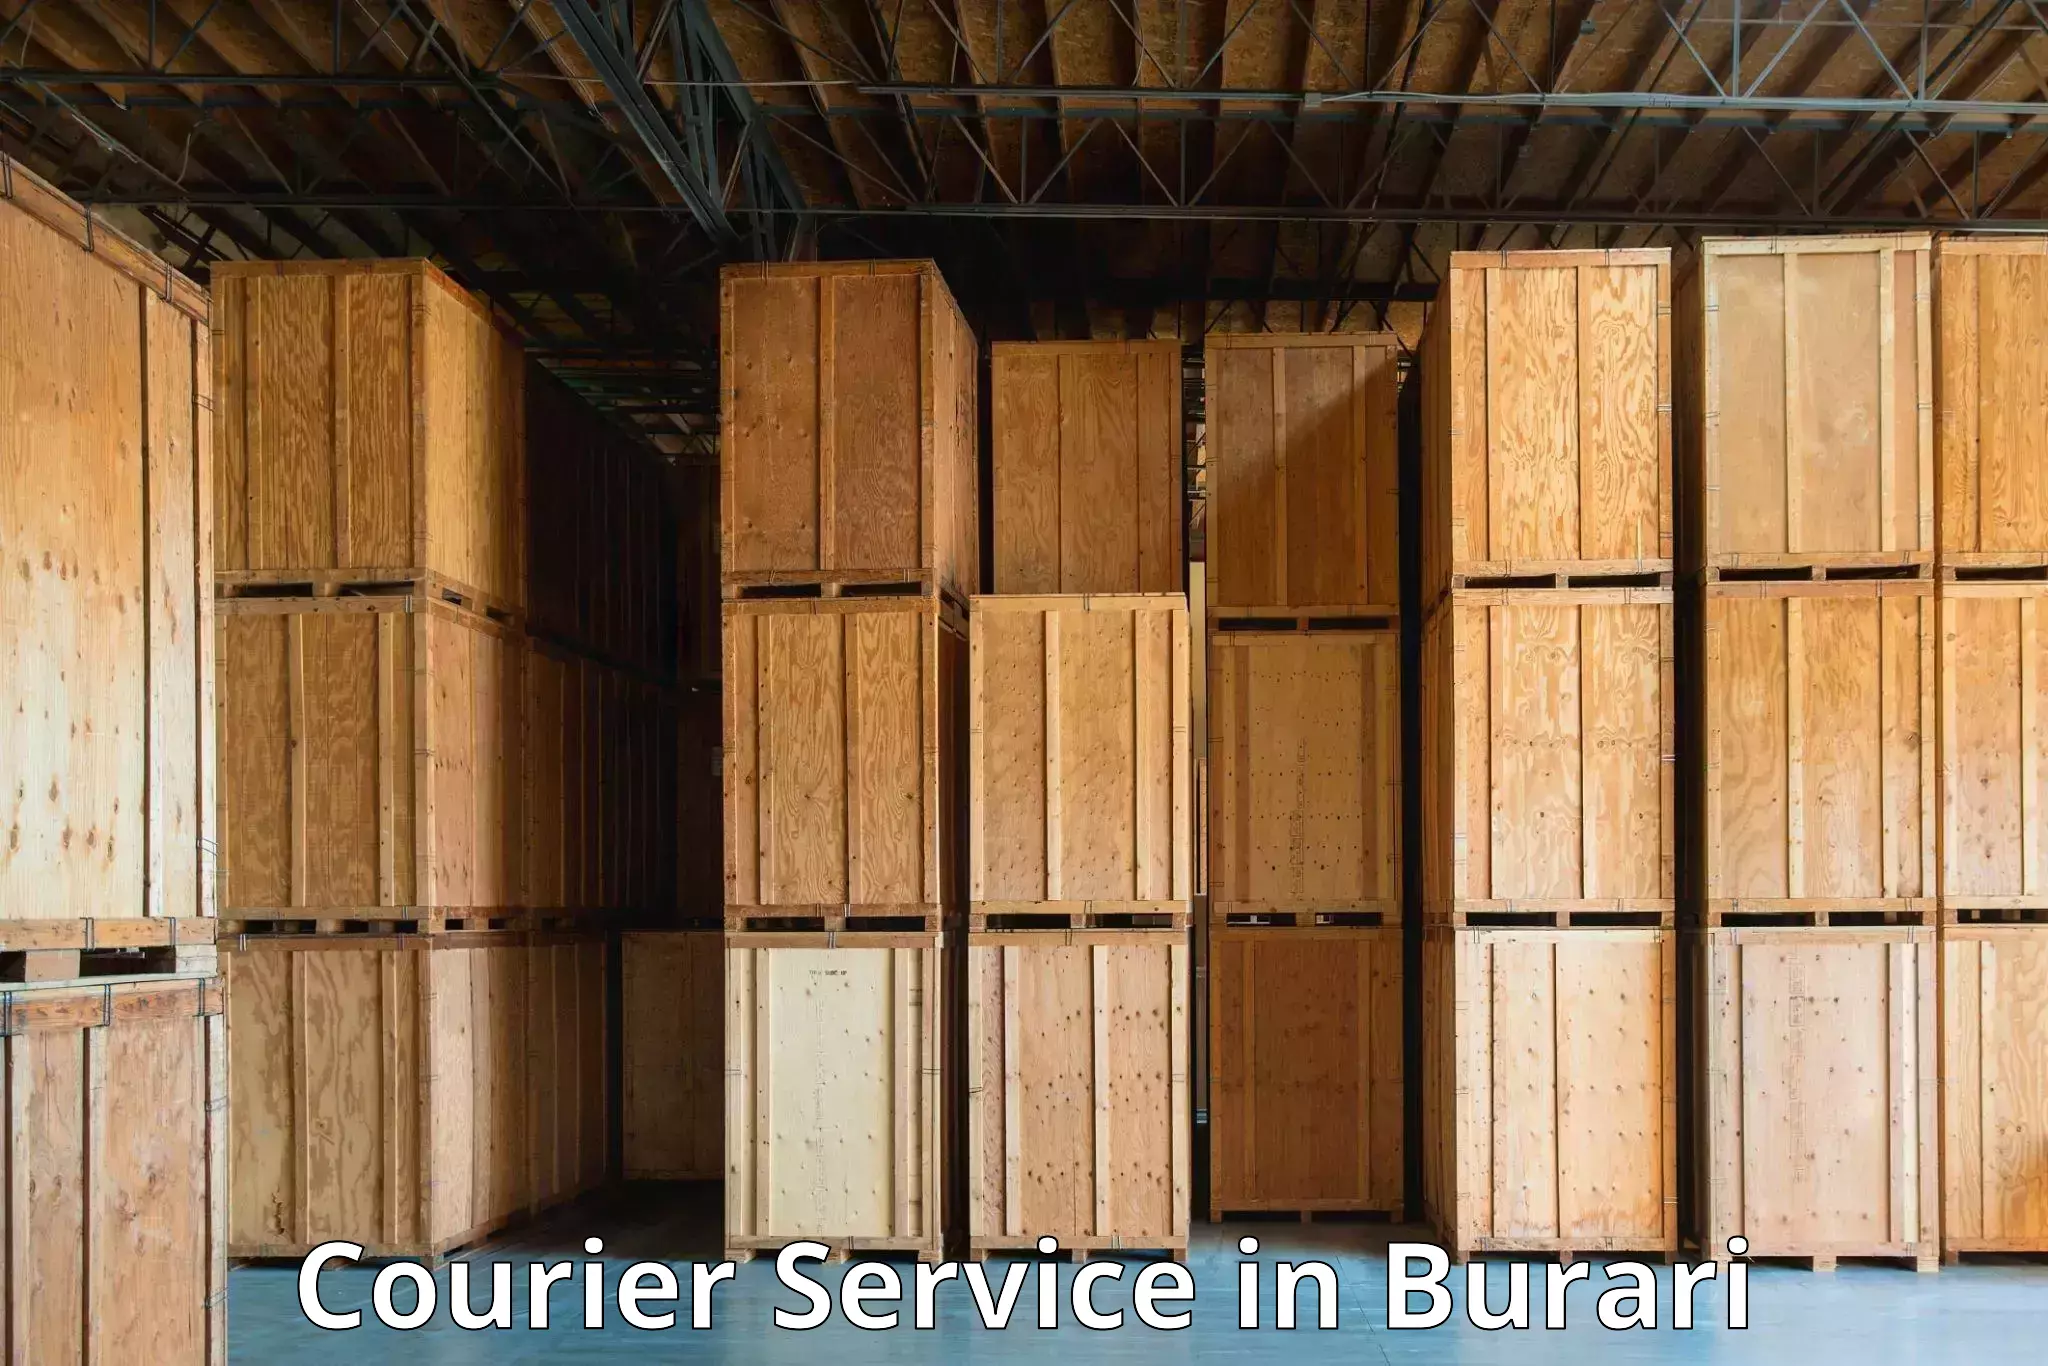 Courier service partnerships in Burari